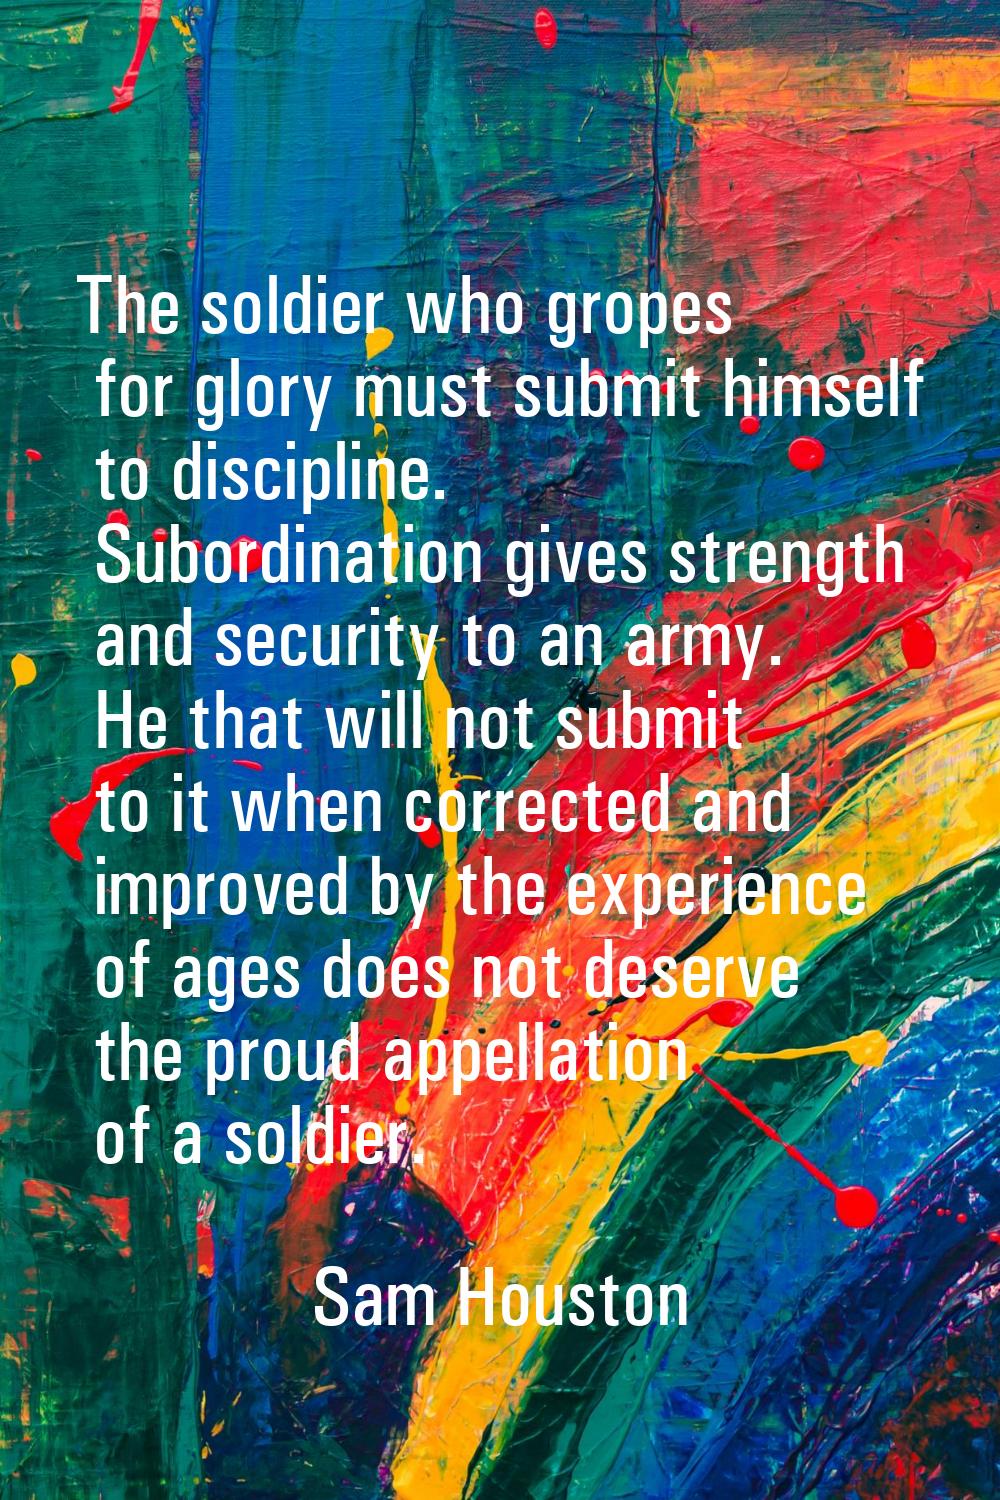 The soldier who gropes for glory must submit himself to discipline. Subordination gives strength an